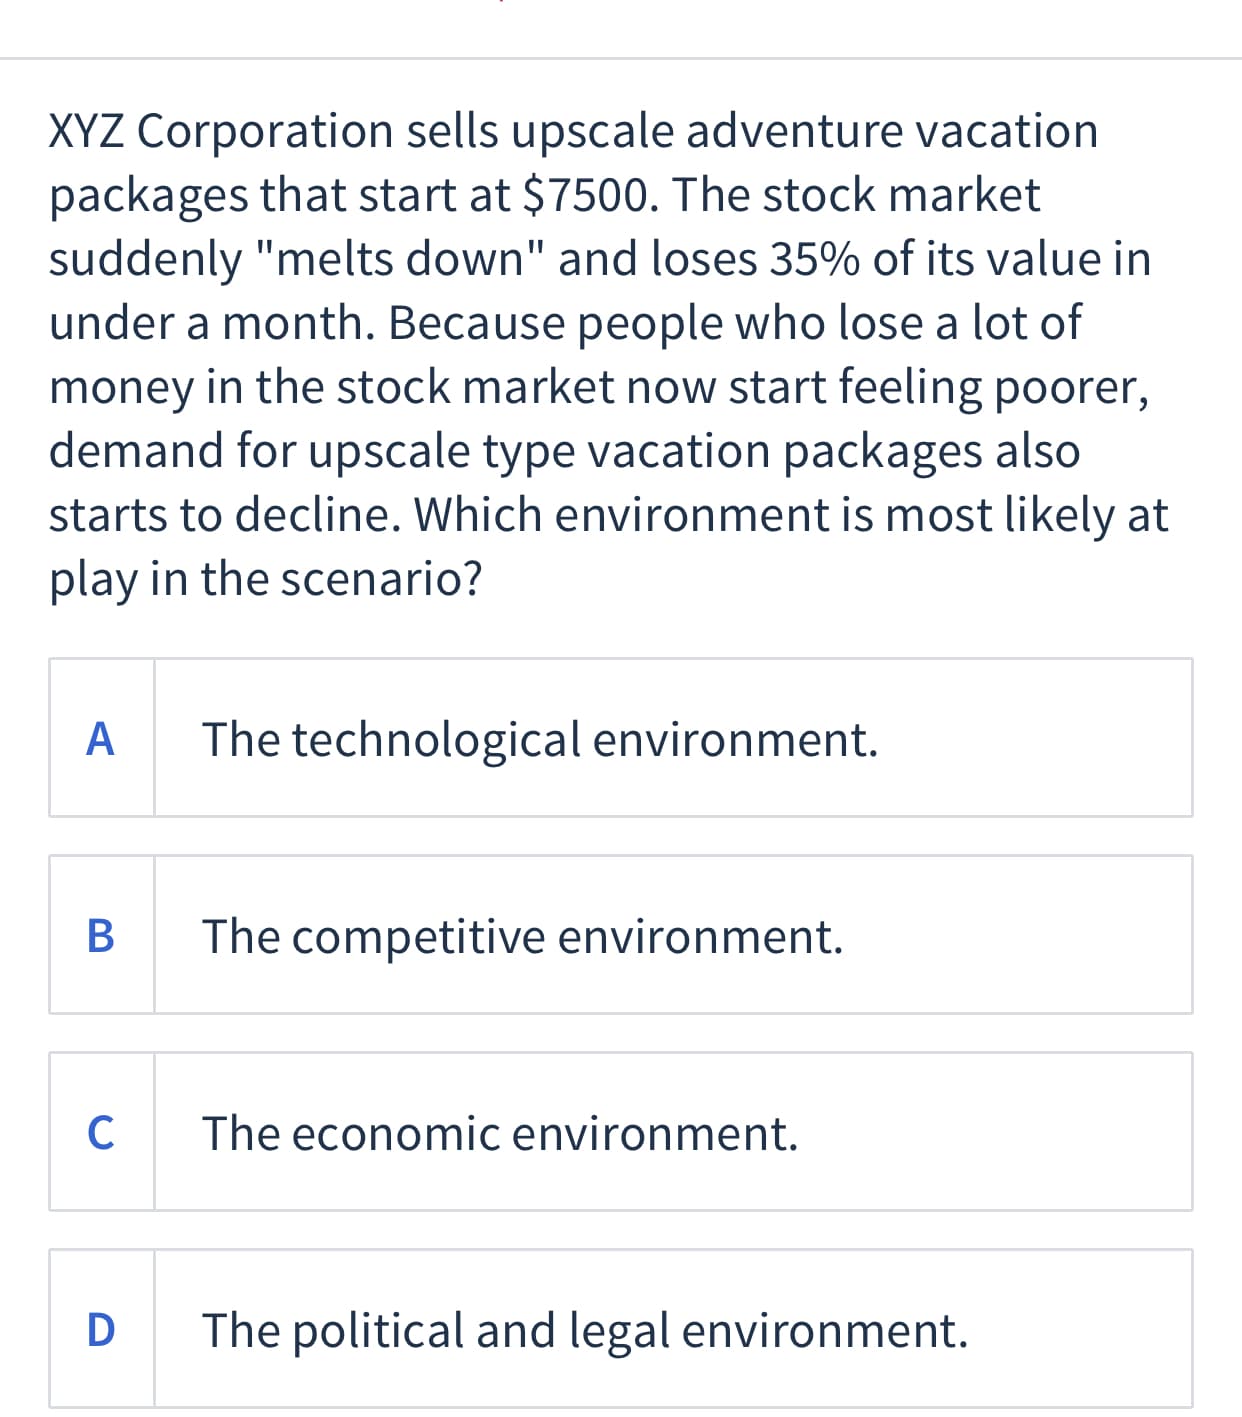 XYZ Corporation sells upscale adventure vacation
packages that start at $7500. The stock market
suddenly "melts down" and loses 35% of its value in
under a month. Because people who lose a lot of
money in the stock market now start feeling poorer,
demand for upscale type vacation packages also
starts to decline. Which environment is most likely at
play in the scenario?
A
The technological environment.
В
The competitive environment.
The economic environment.
D
The political and legal environment.
